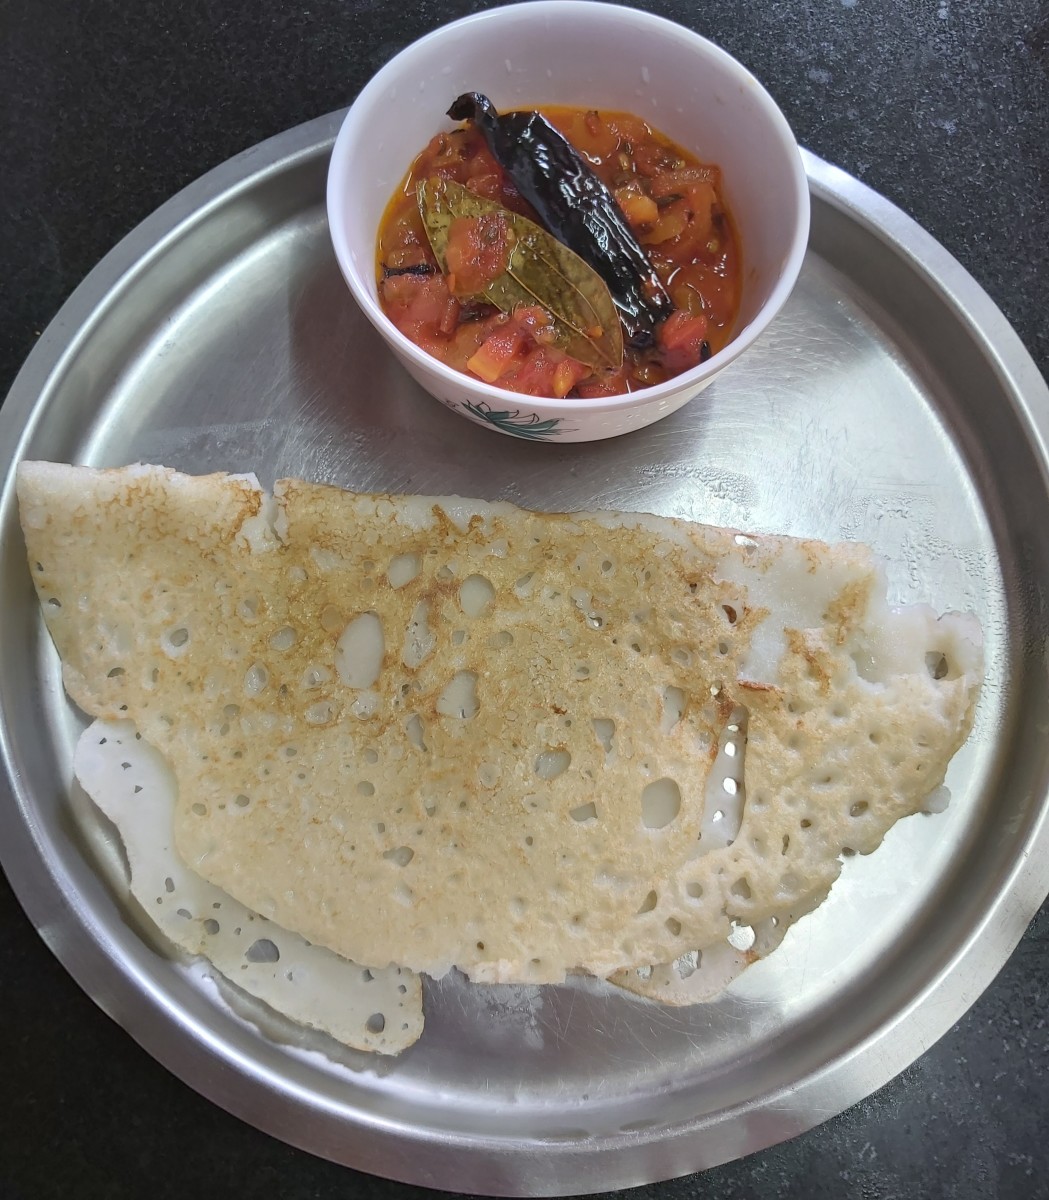 Ladle the tomato chutney into a serving bowl. Serve hot with dosa, paratha or snacks and enjoy.